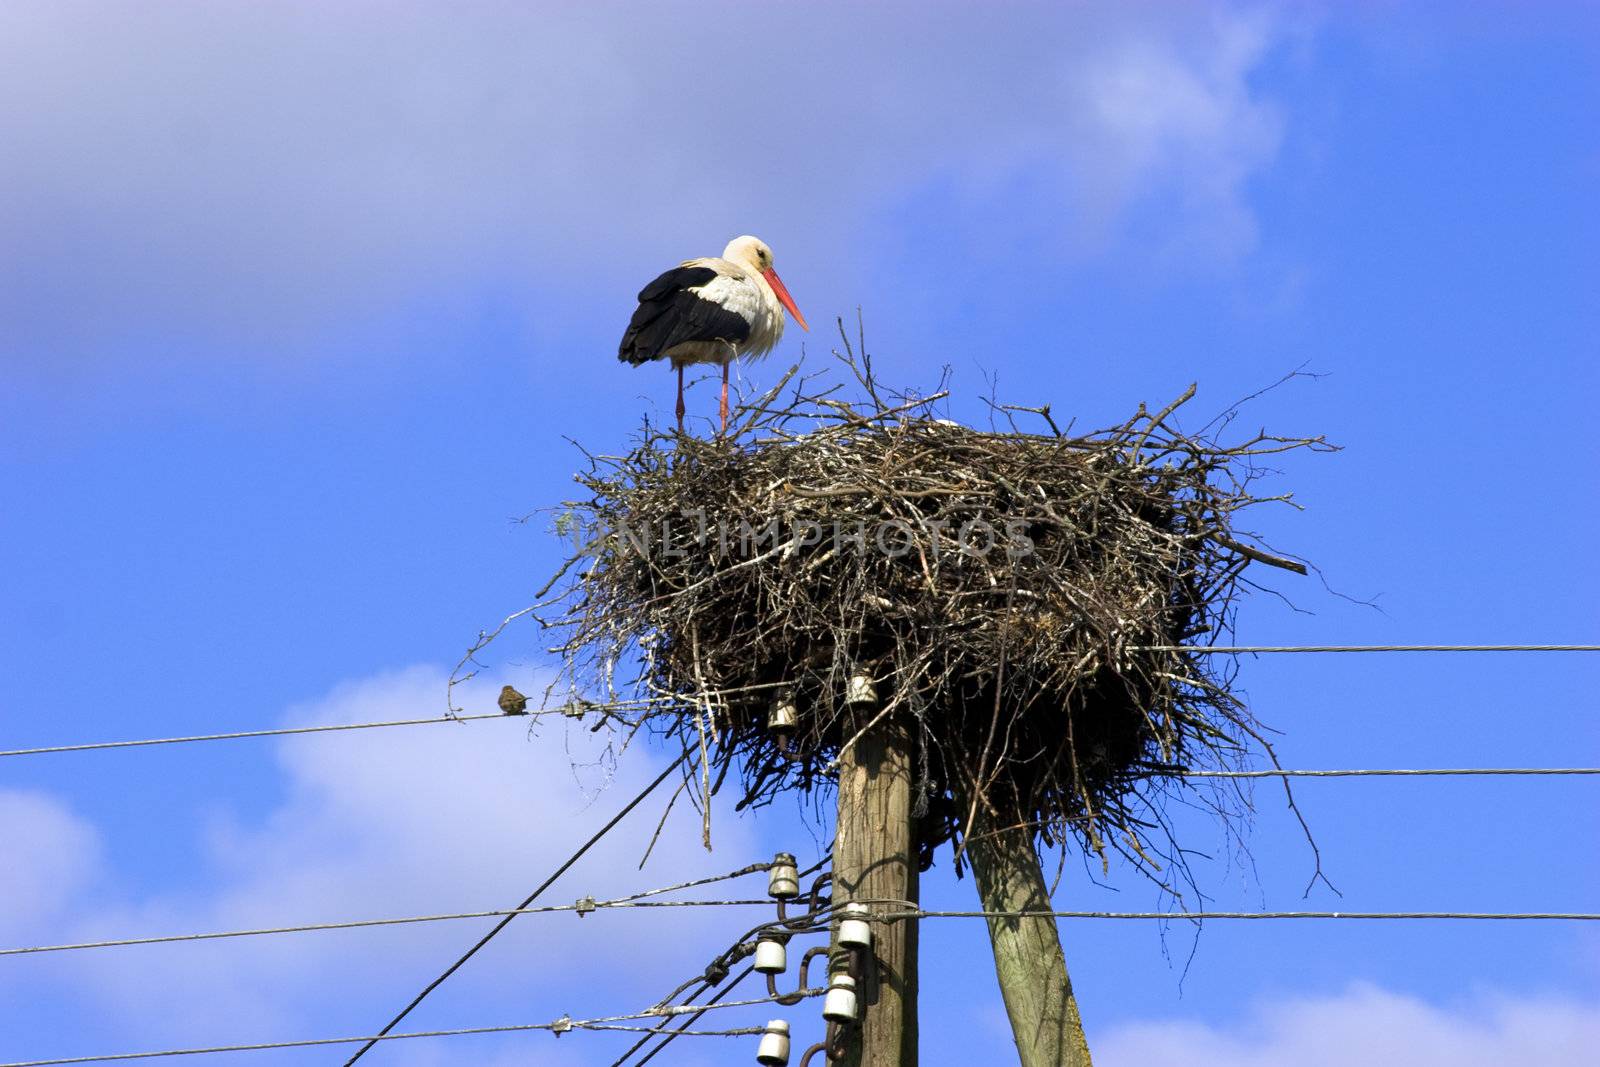 White Stork (Ciconia ciconia) in nest on power line. Backroun blue sky with white clouds. White Stork is a symbol of childbirth